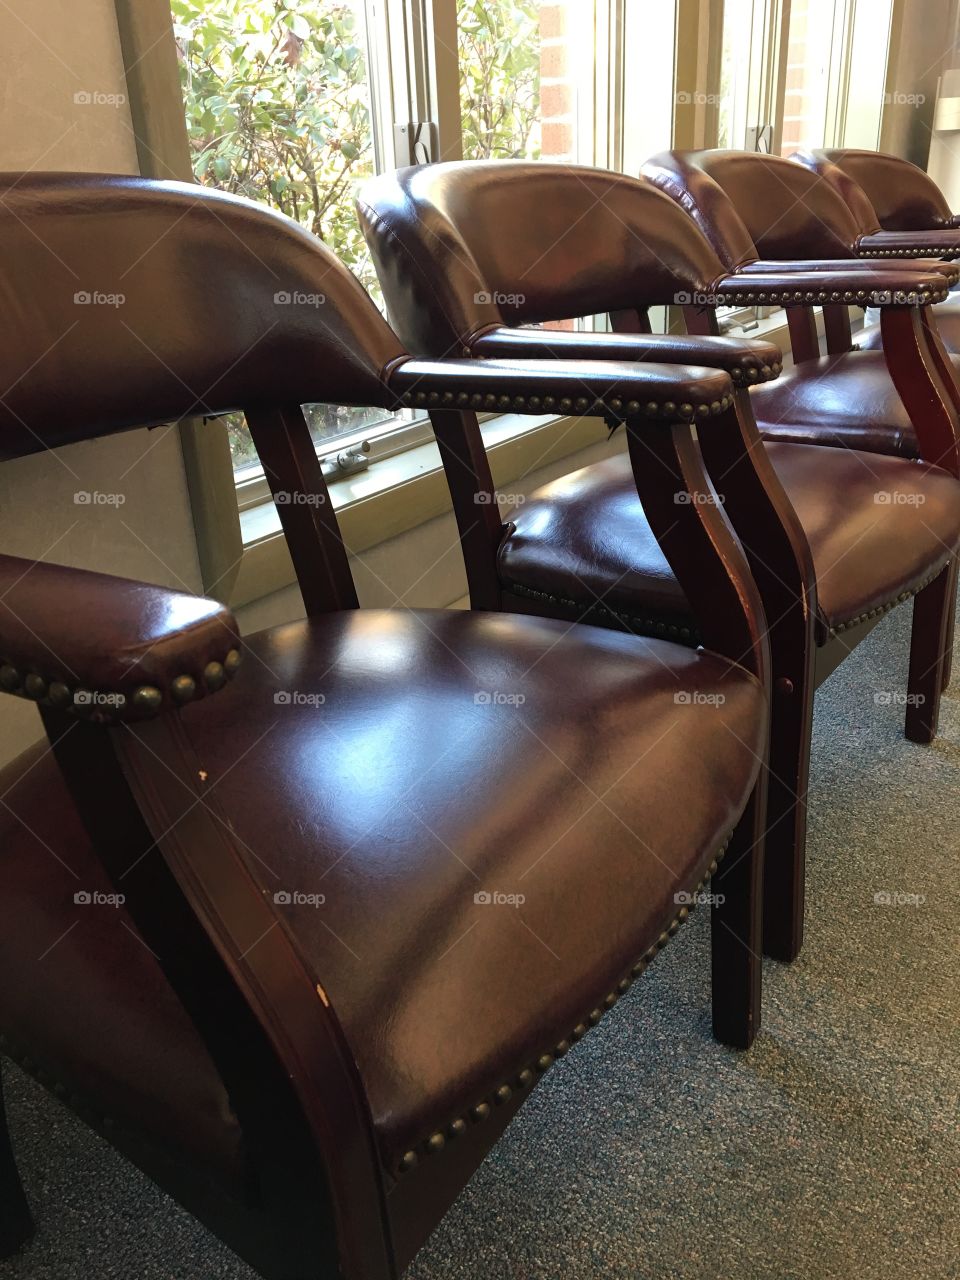 Chairs in Dr's office